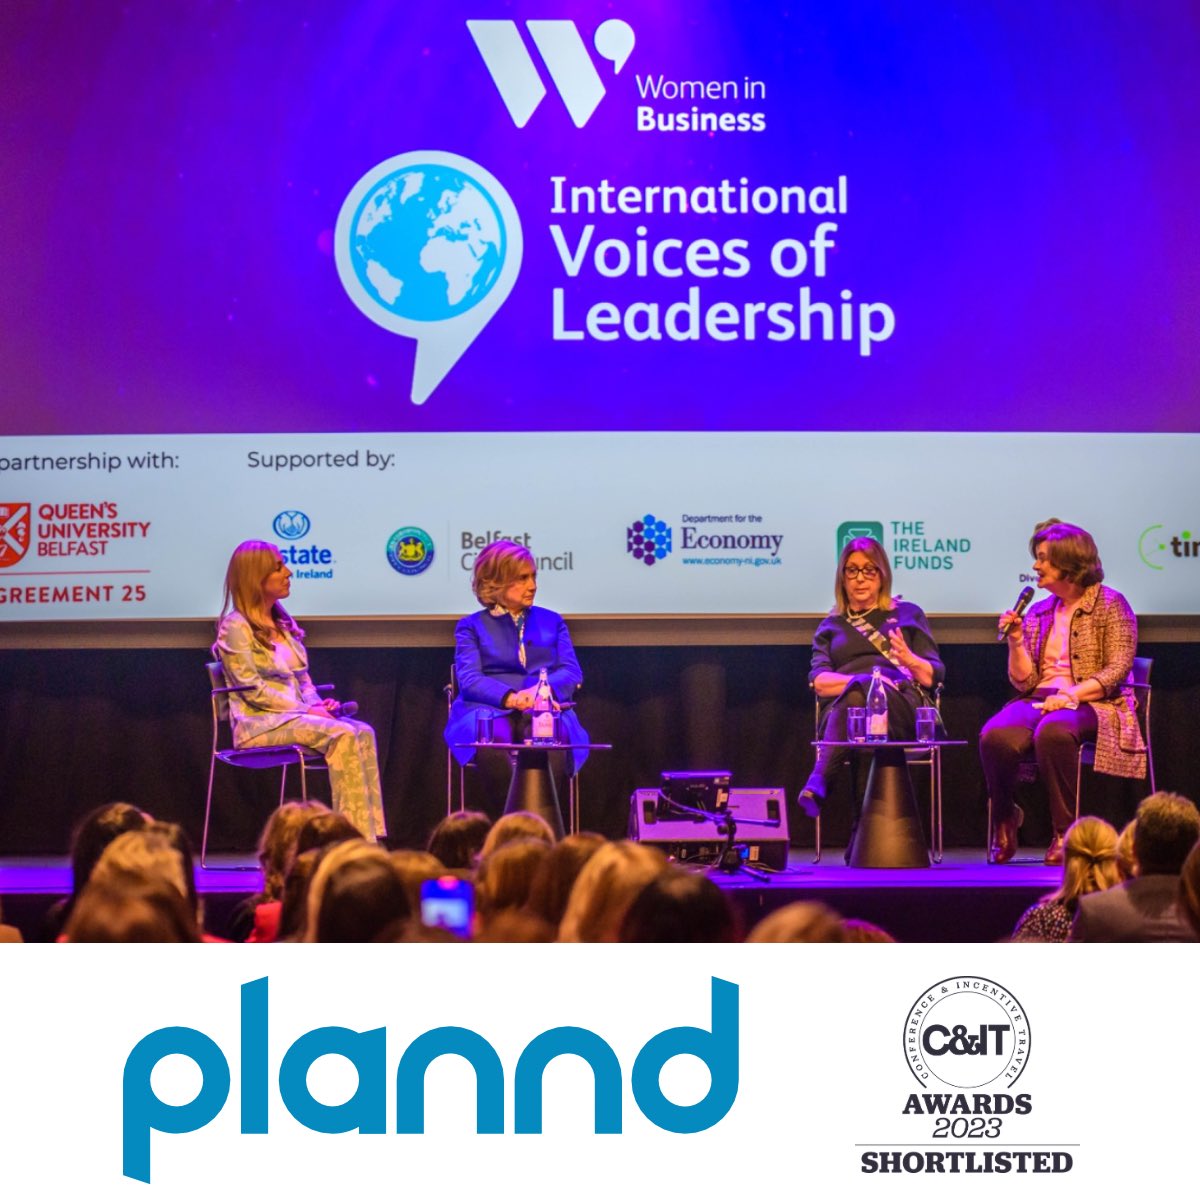 Excited for the Conference & Incentive Travel (C&IT) Awards tomorrow night at Raffles London at The OWO. Our event with Women in Business NI - International Voices of Leadership Conference is shortlisted. Fingers crossed for a great night! #CITAwards #plannd #eventprofs